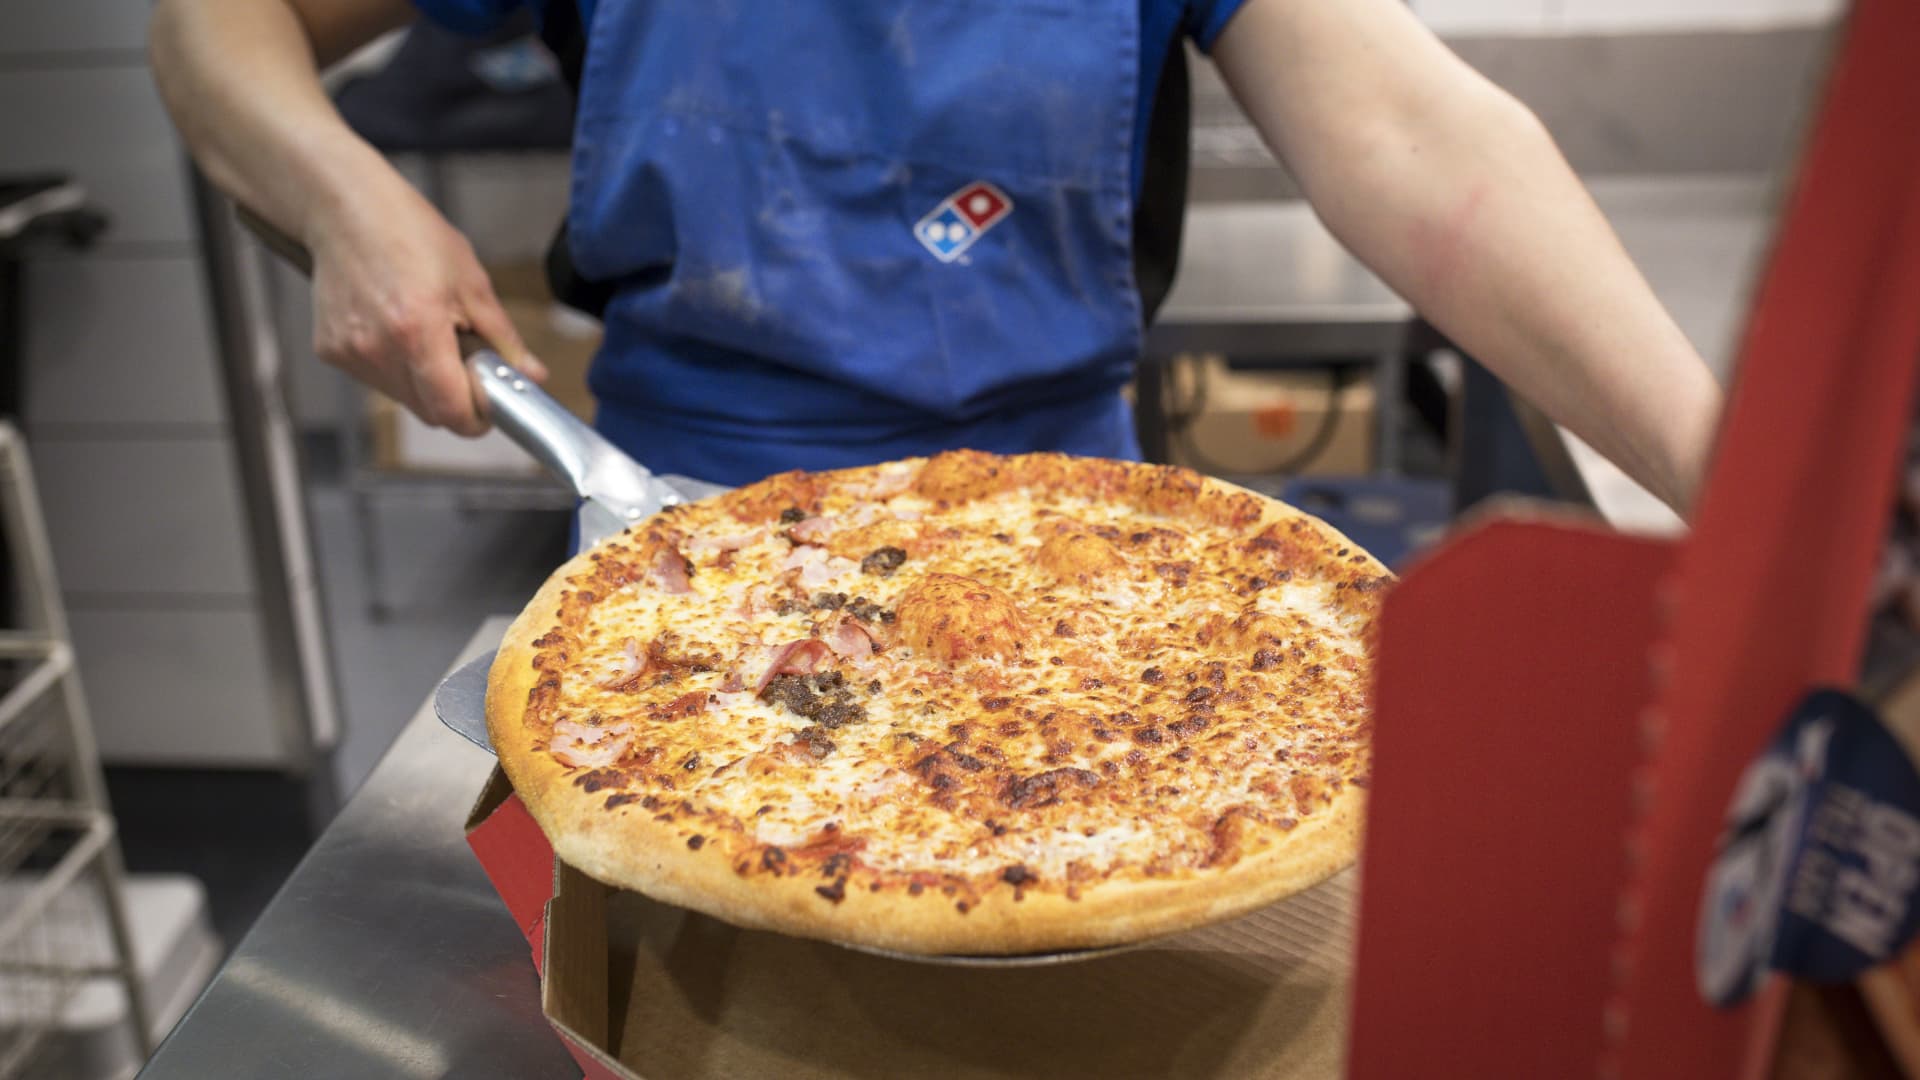 Domino's Pizza (DPZ) Q2 2022 earnings